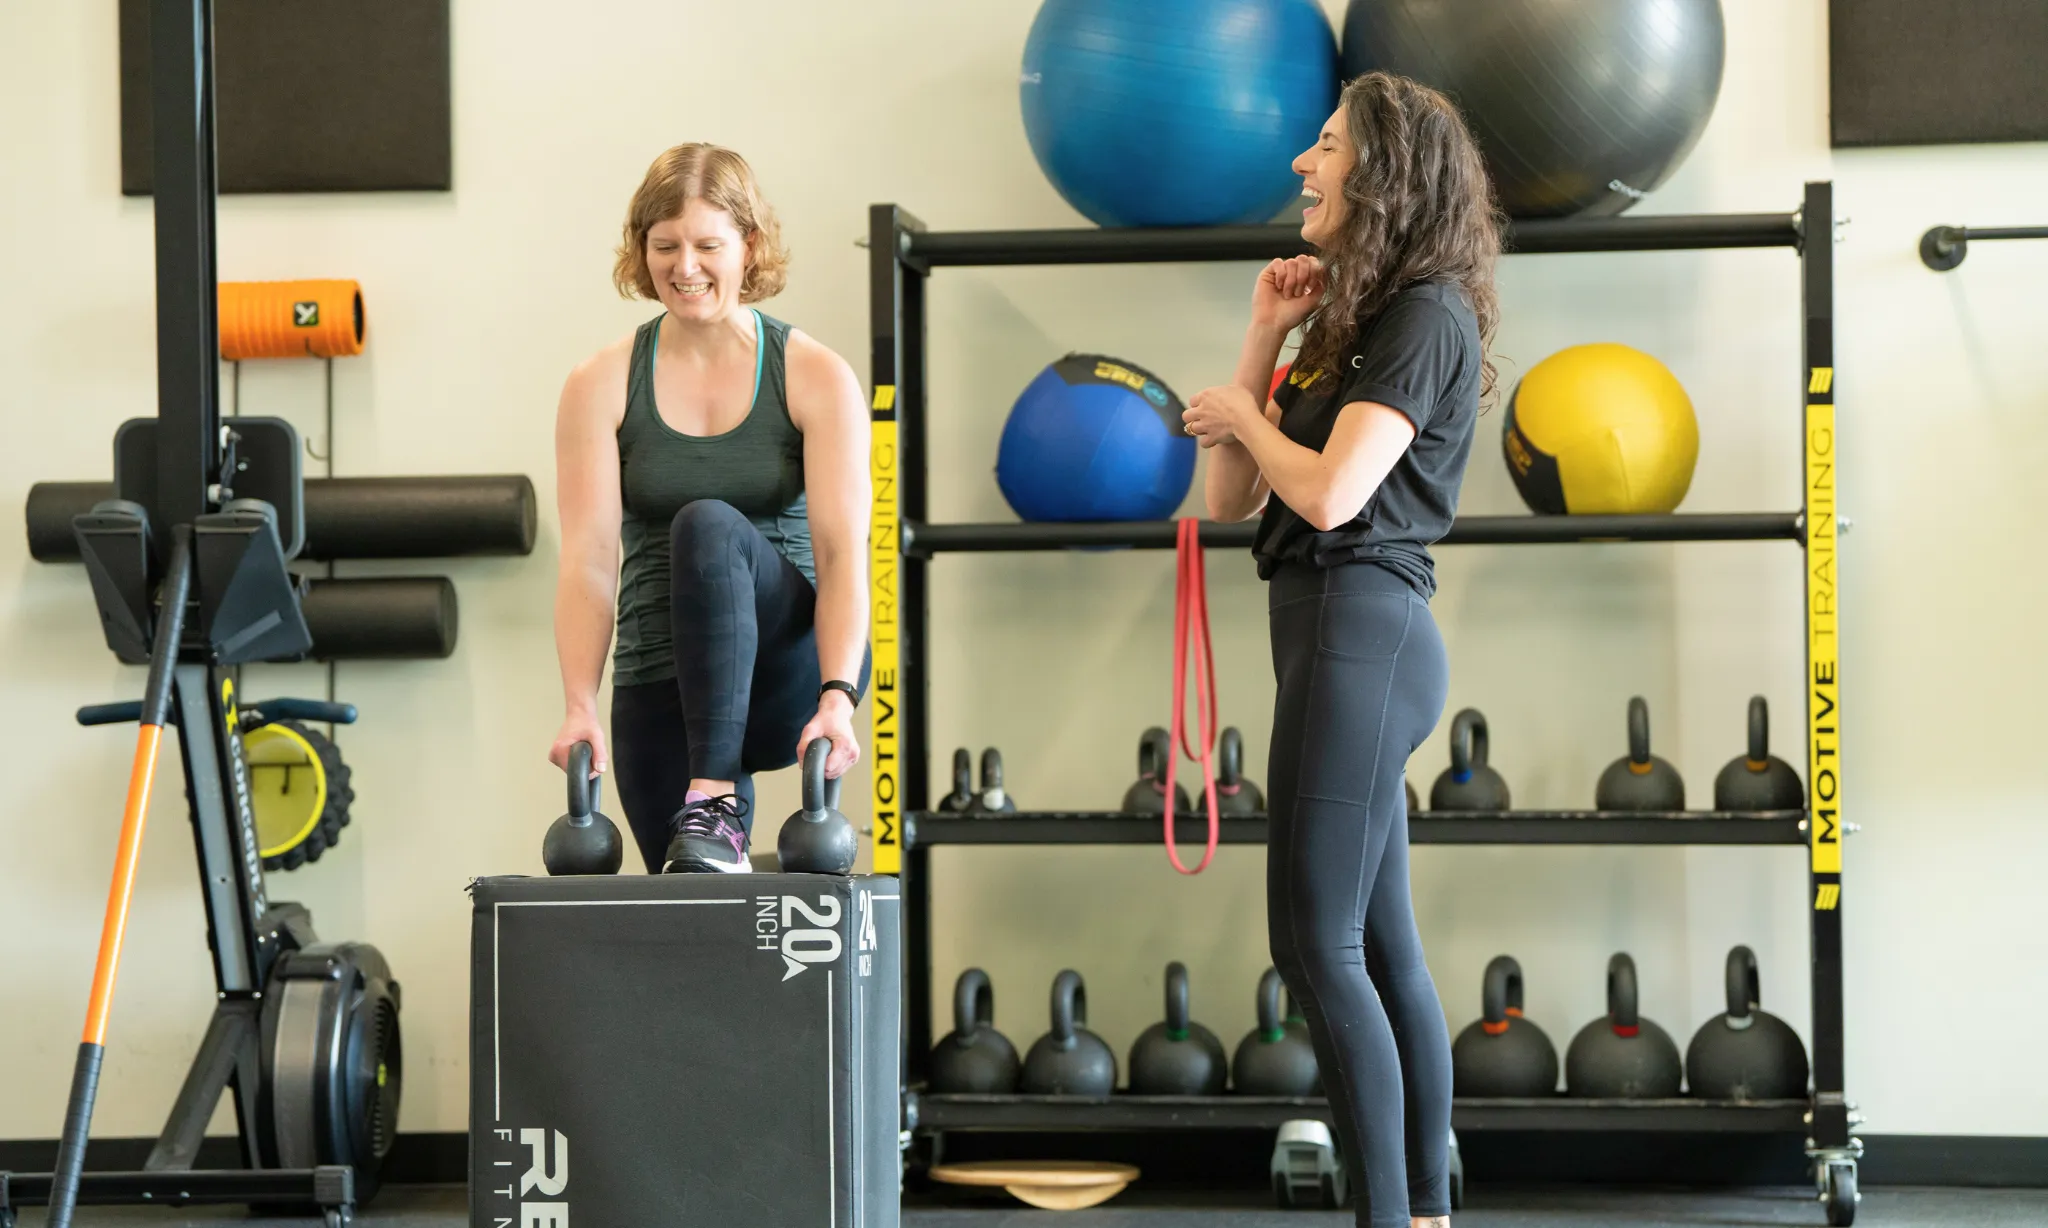 Top Tips For What To Look for In A Fitness Trainer